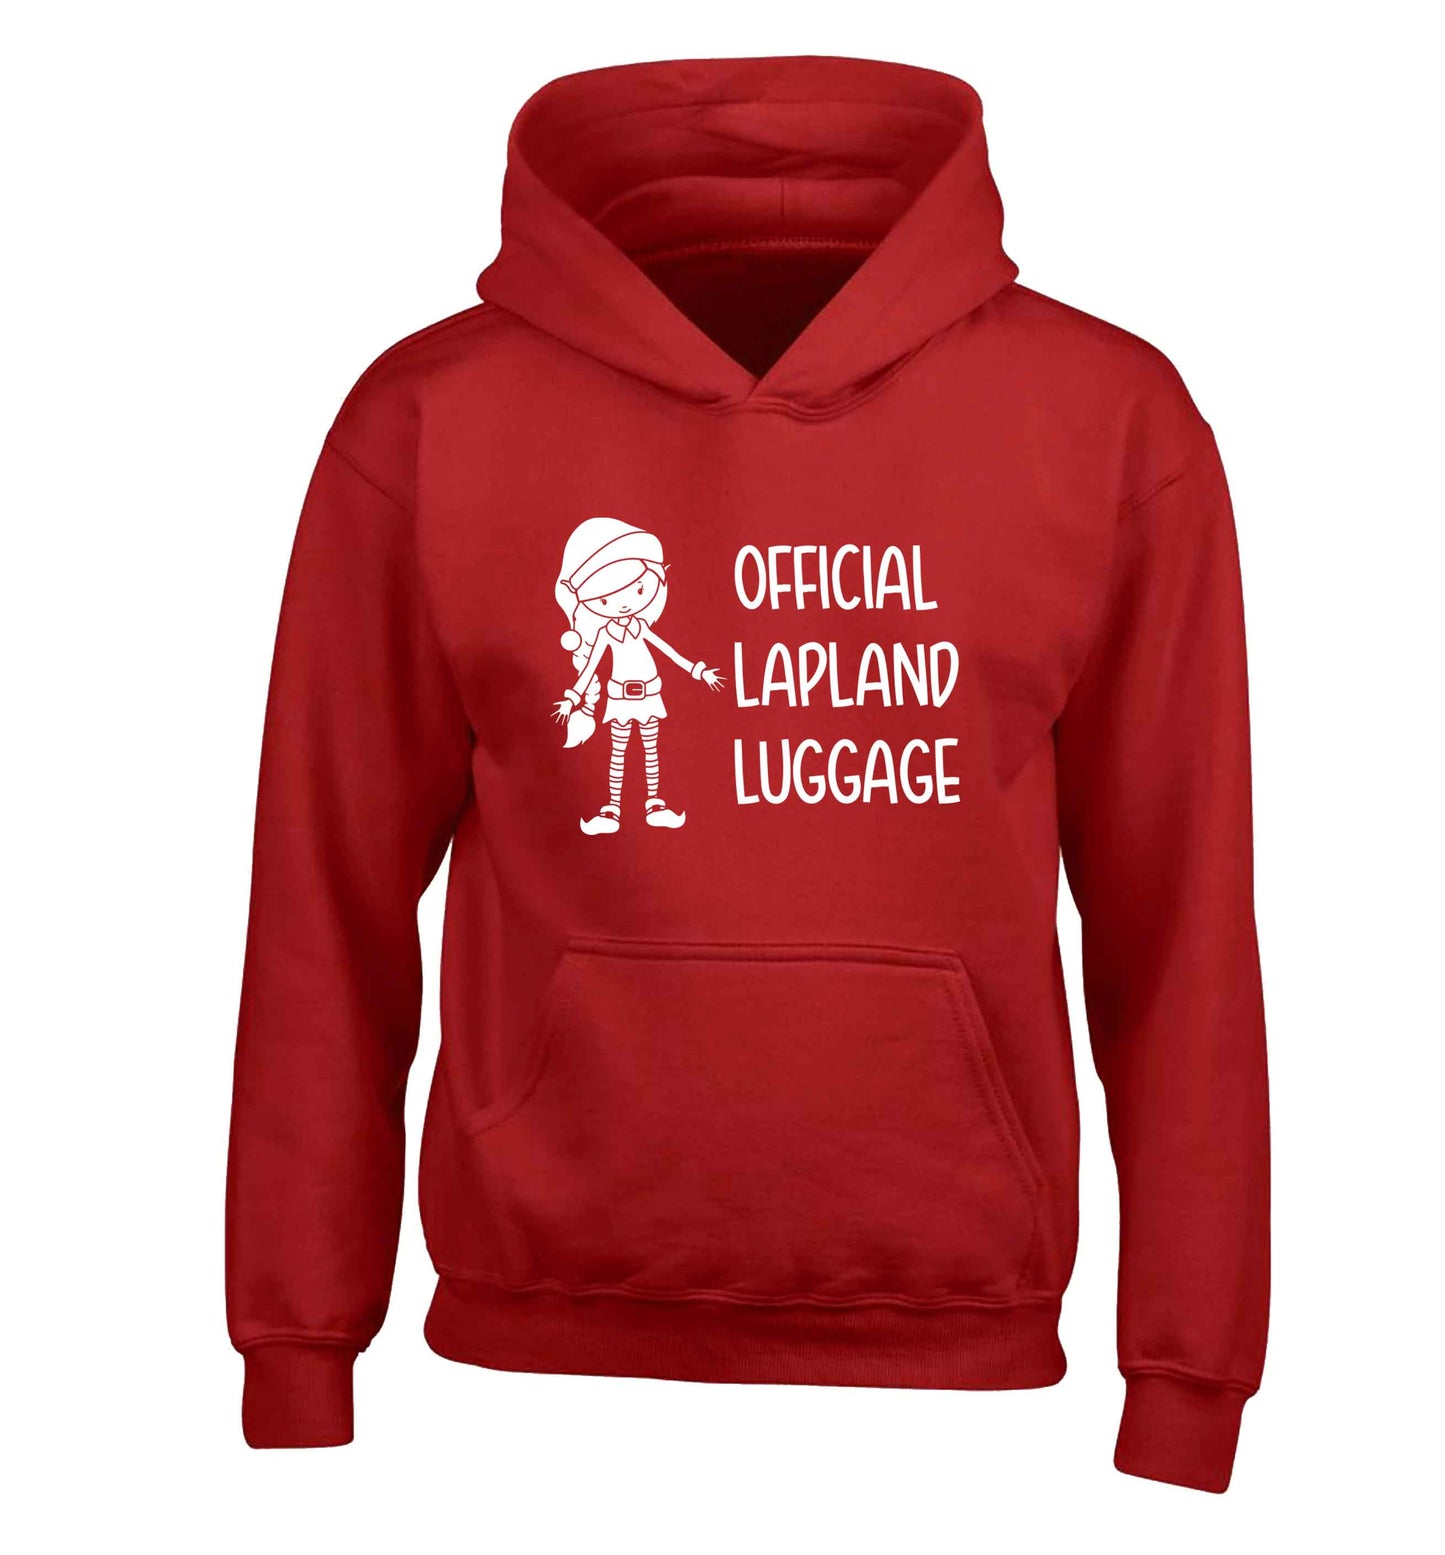 Official lapland luggage - Elf snowflake children's red hoodie 12-13 Years